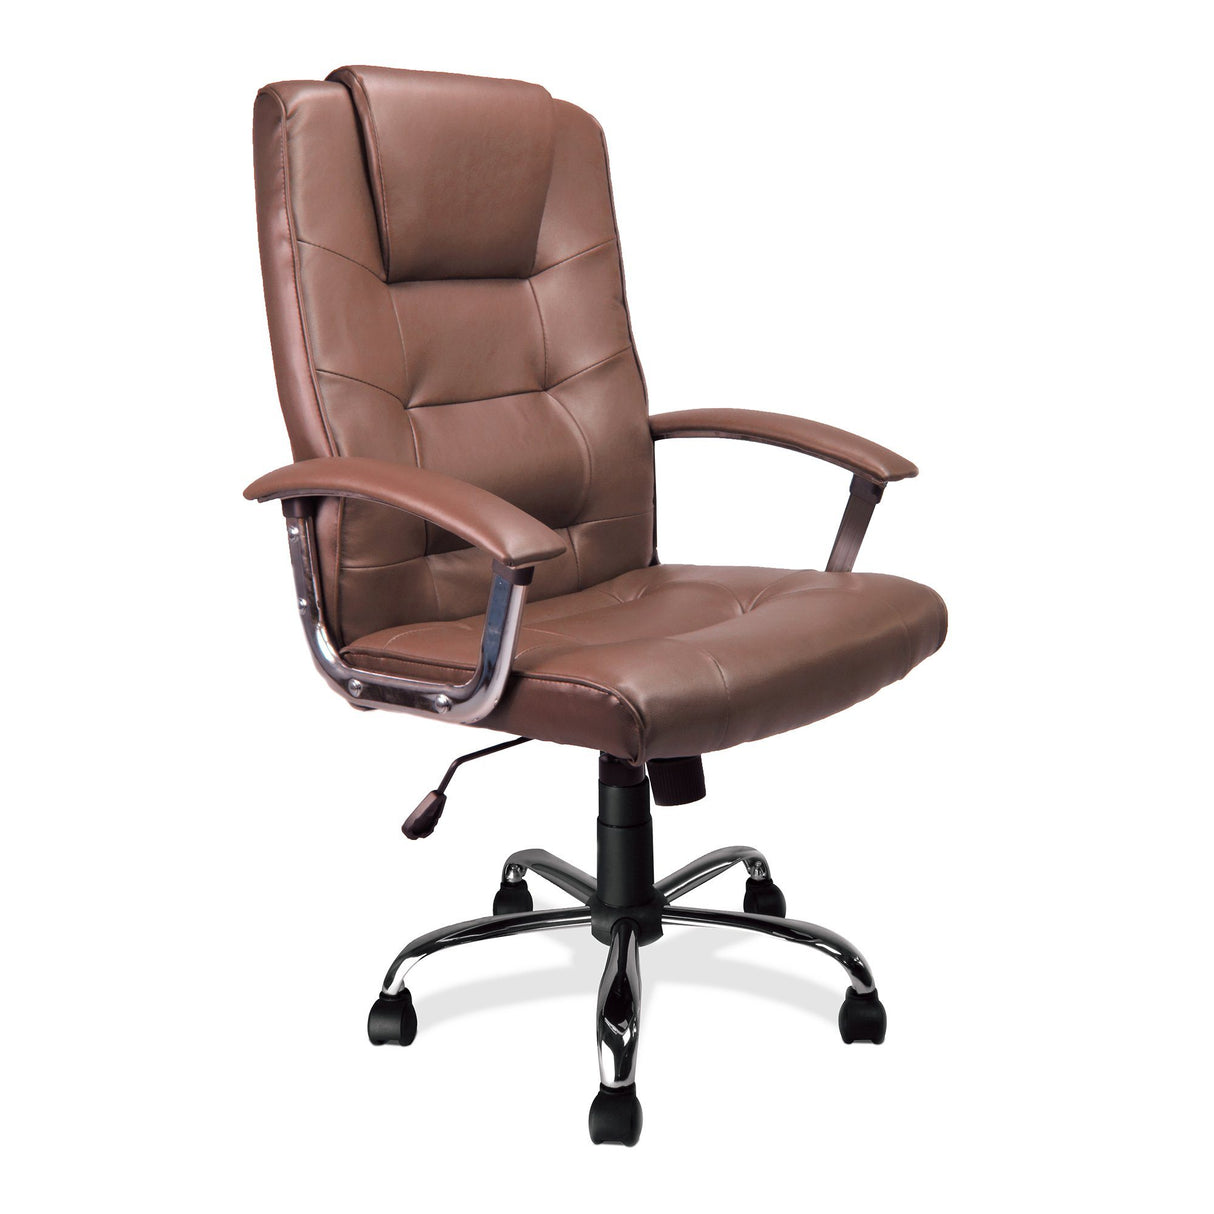 Nautilus Designs Westminster High Back Leather Faced Executive Armchair with Integral Headrest and Chrome Base - Brown